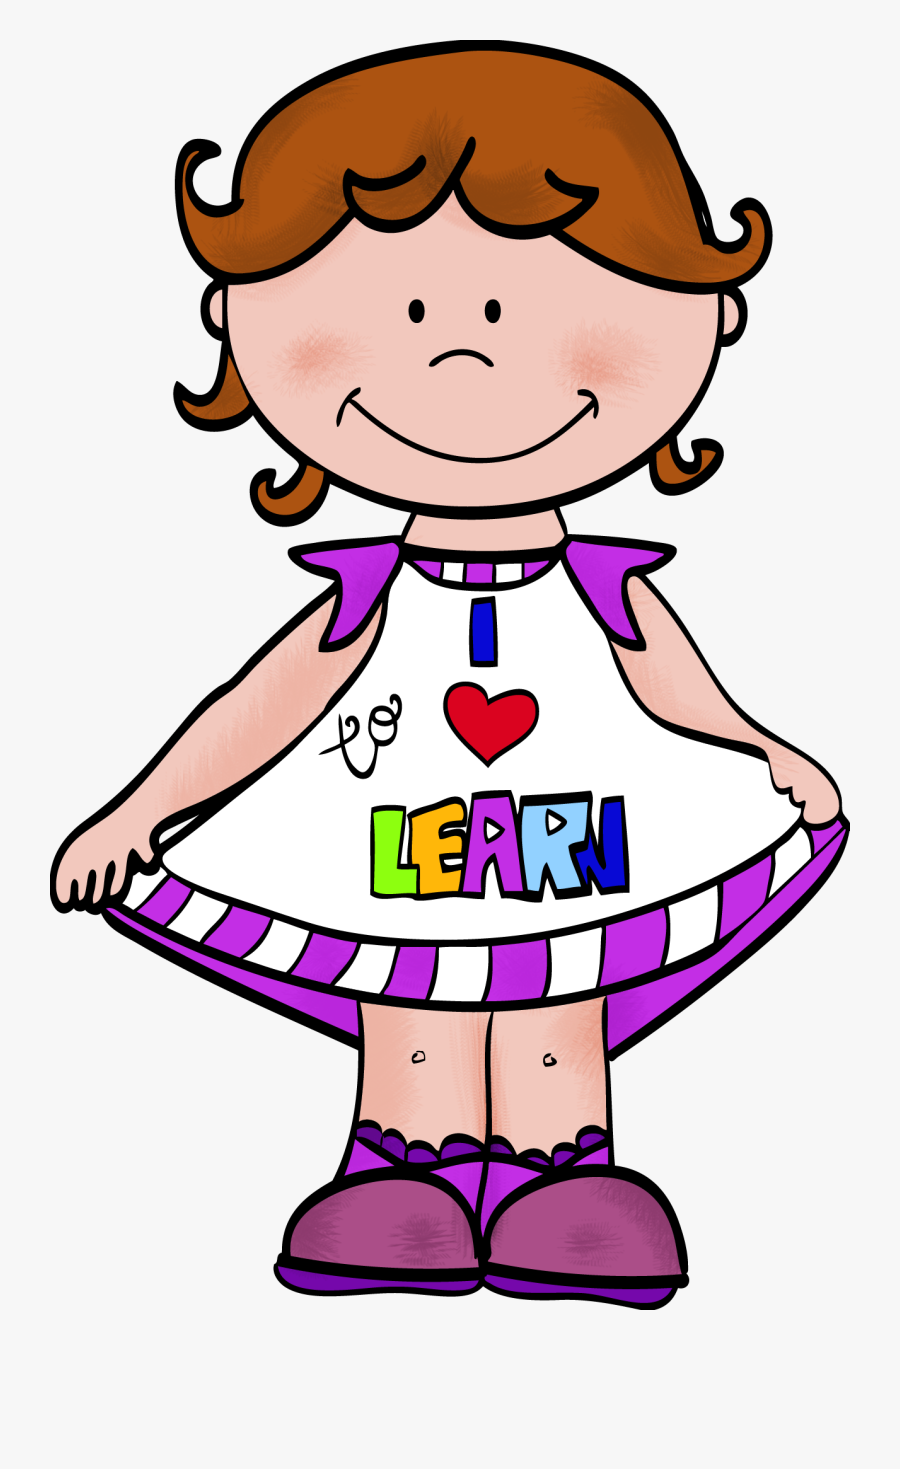 Direct Instruction , Free Transparent Clipart - ClipartKey